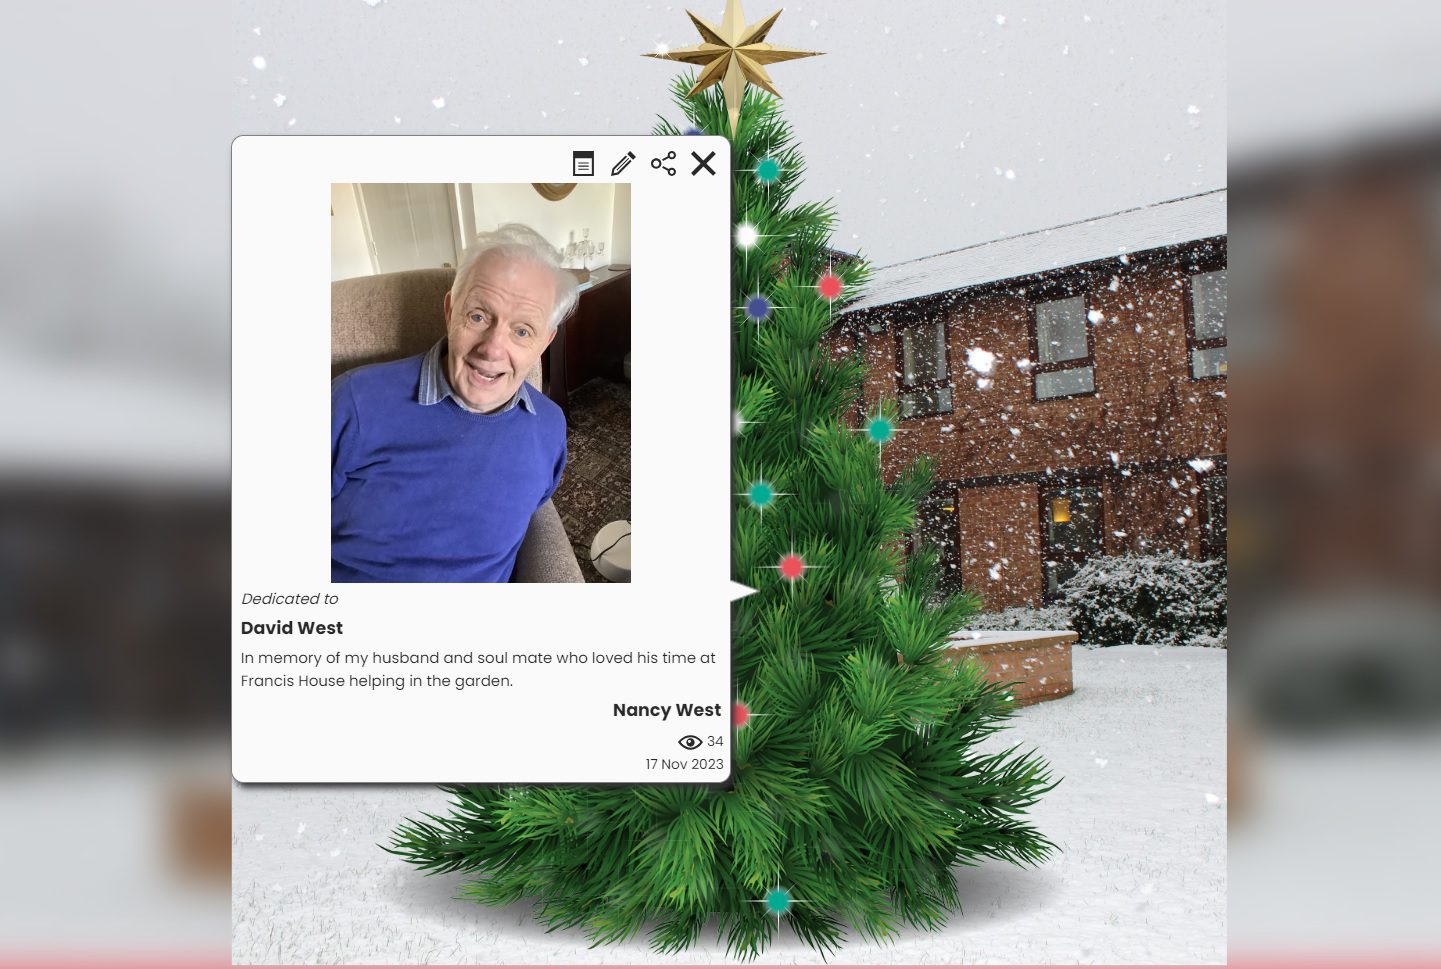 Picture of a man with grey hair wearing a blue jumper over a background of a virtual Christmas tree